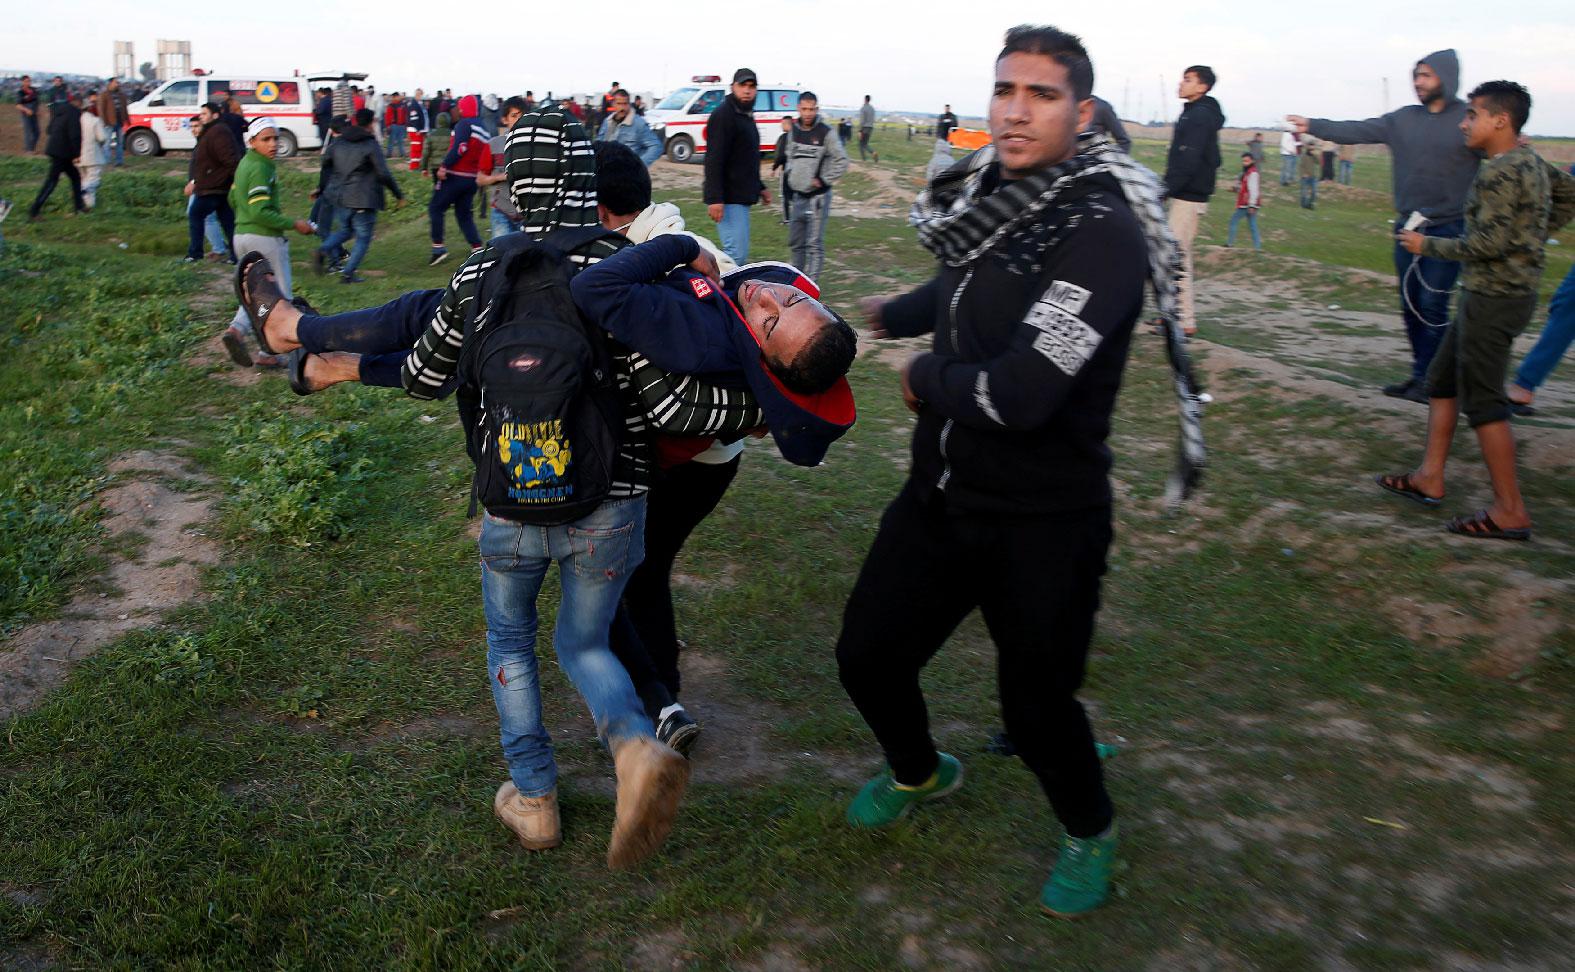 A wounded Palestinian is evacuated during a protest at the Israel-Gaza border fence, east of Gaza City February 22, 2019.